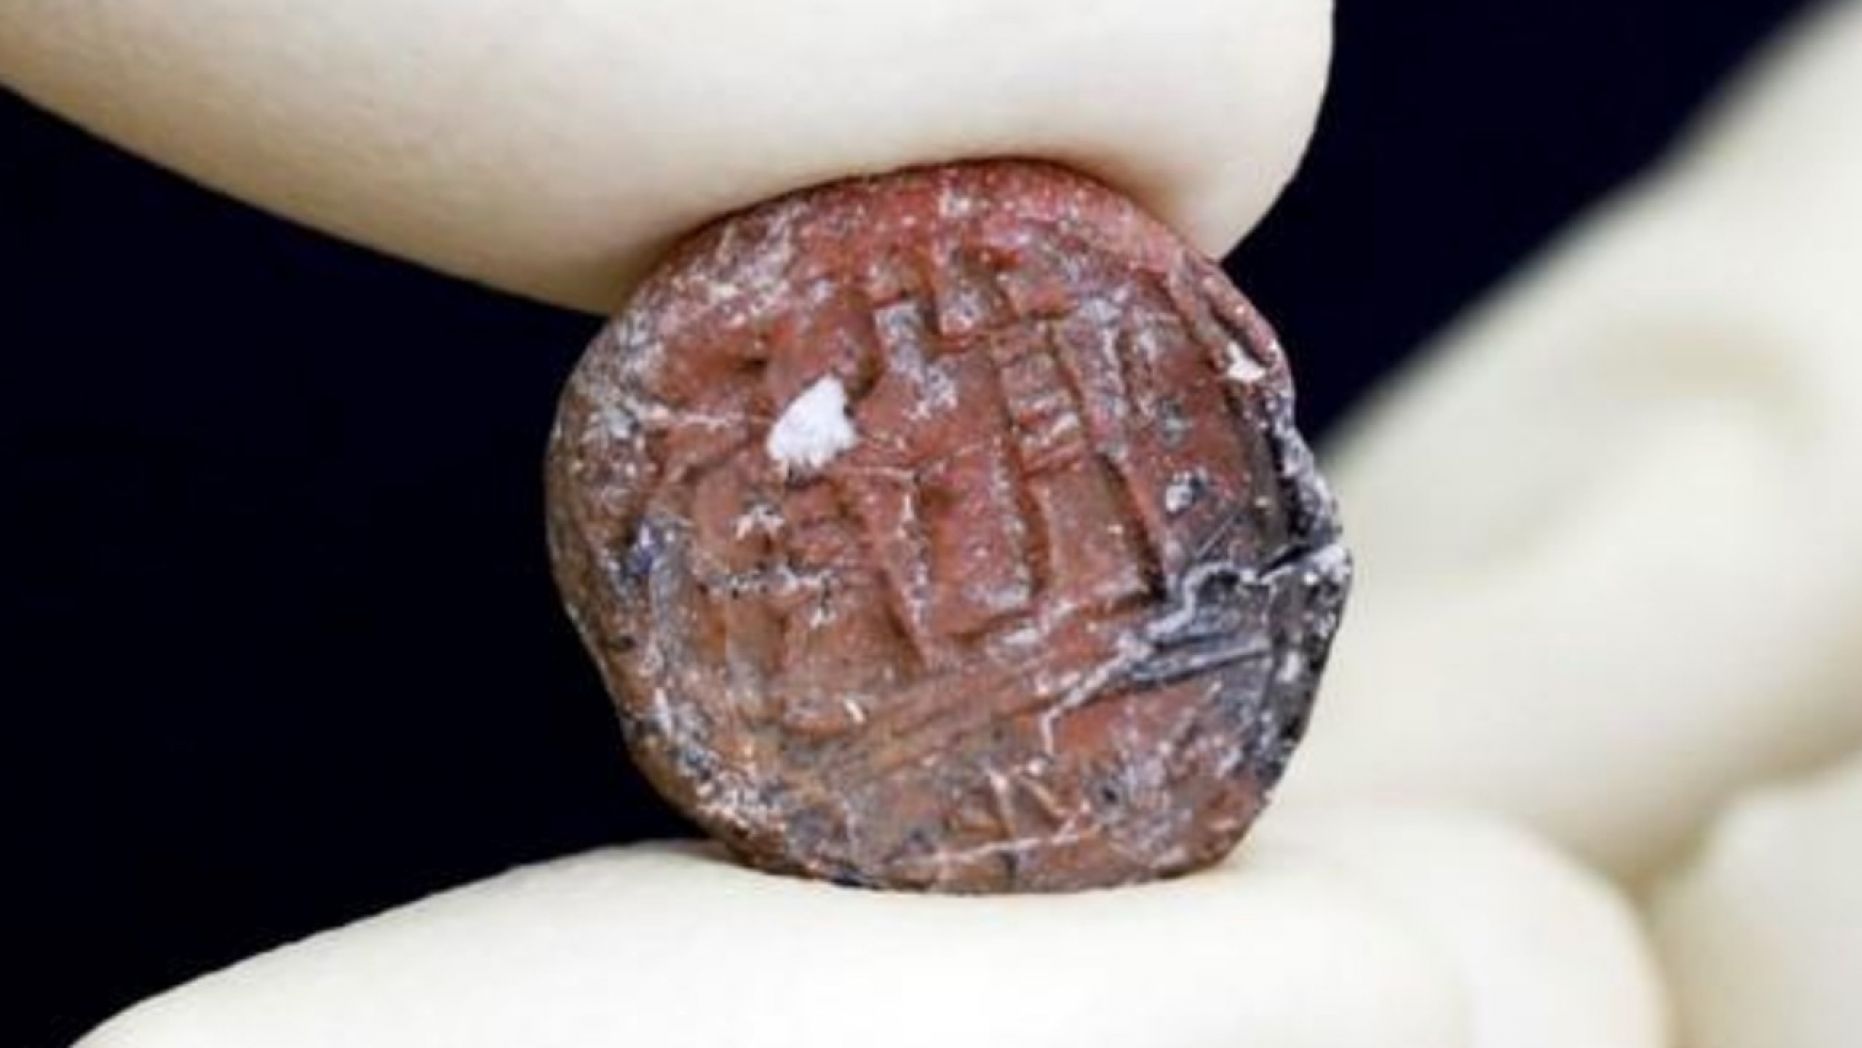 Rare, 2,700-year-old clay seal discovered in Jerusalem - Nexus Newsfeed